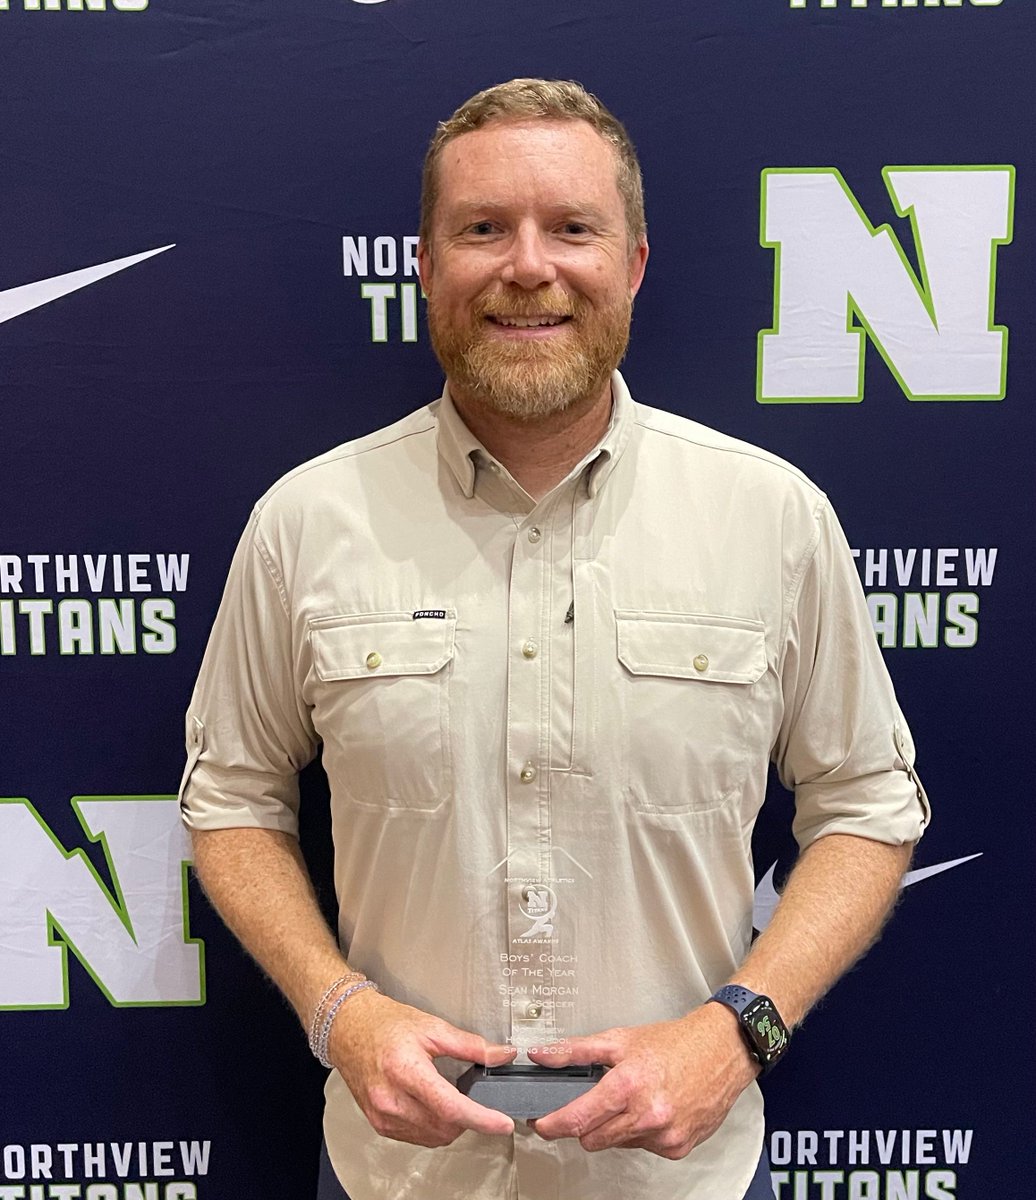 Congratulations to Varsity Boys Headcoach Sean Morgan who was recognized as the Coach of the Year at Northview Spring Sports Atlas Awards!